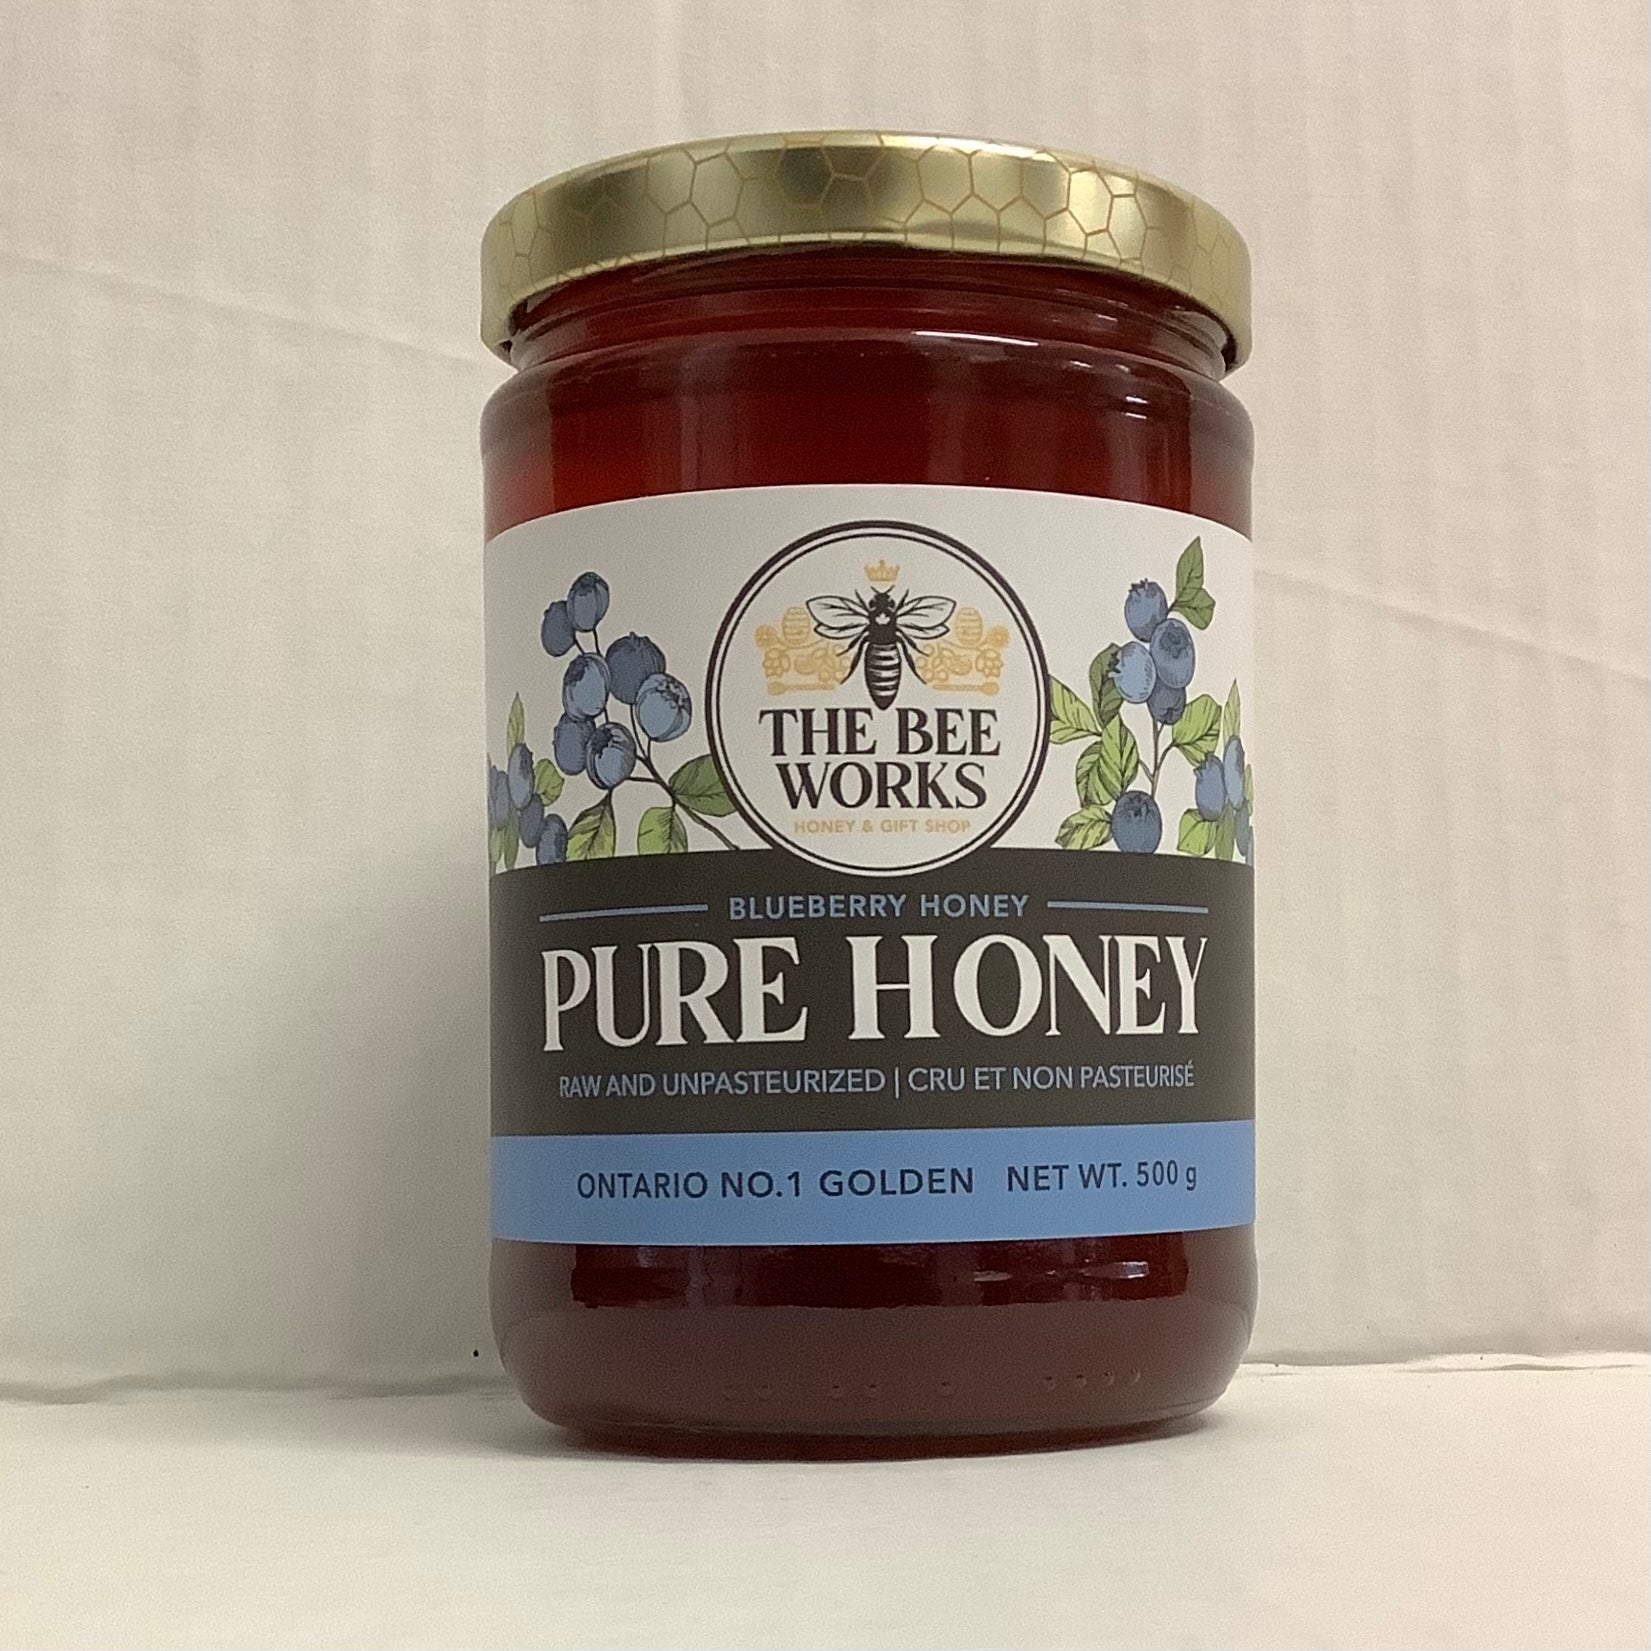 The Bee Works Blueberry Honey